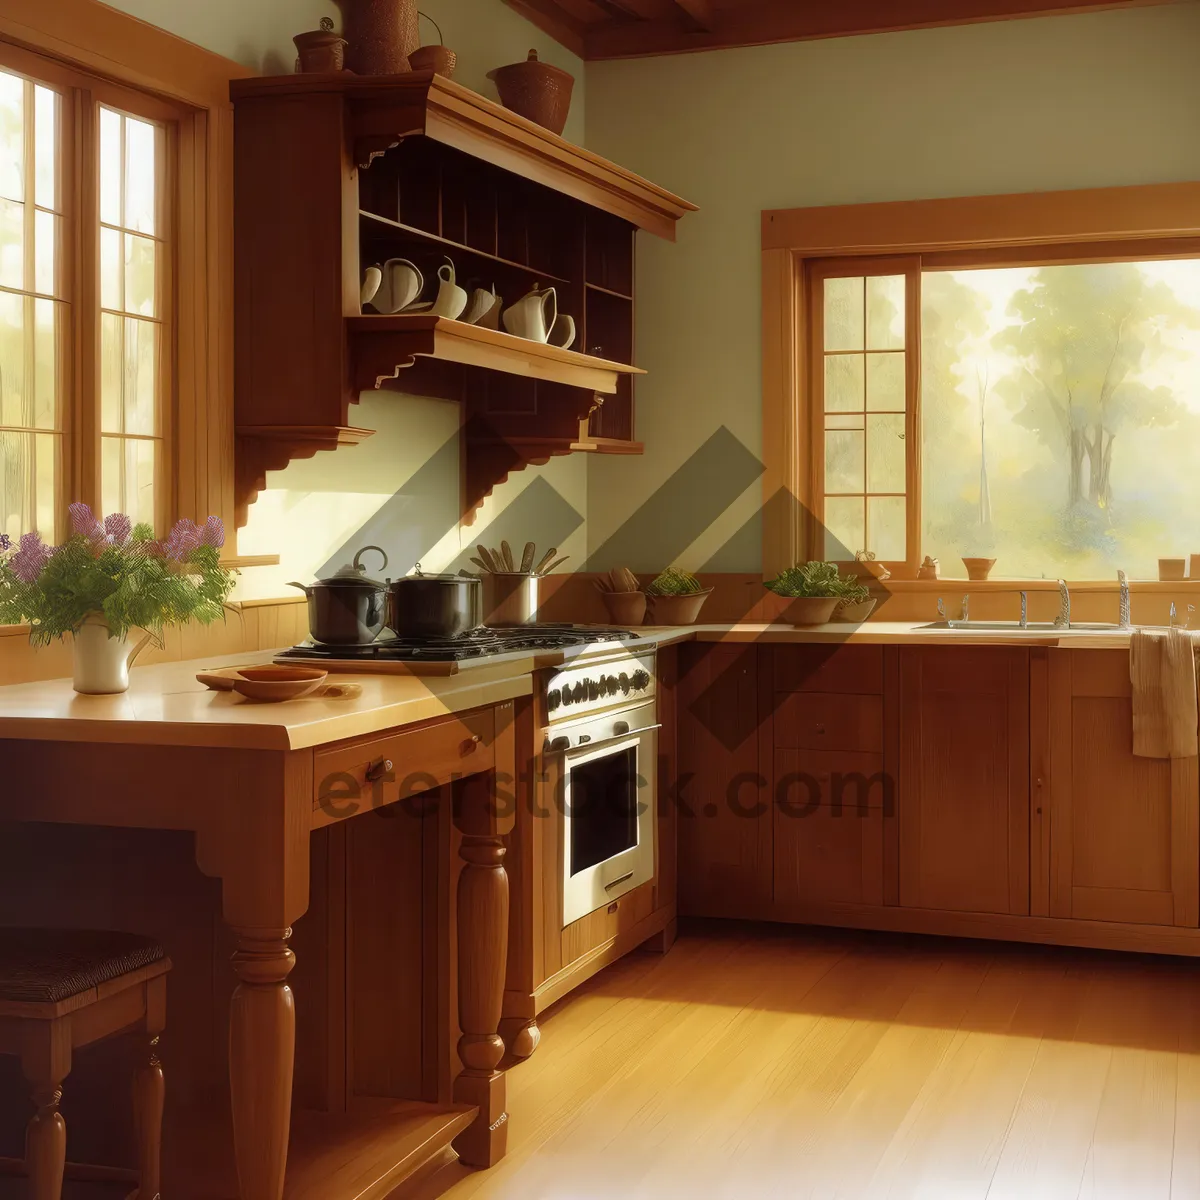 Picture of Modern Kitchen Interior with Wood Accents